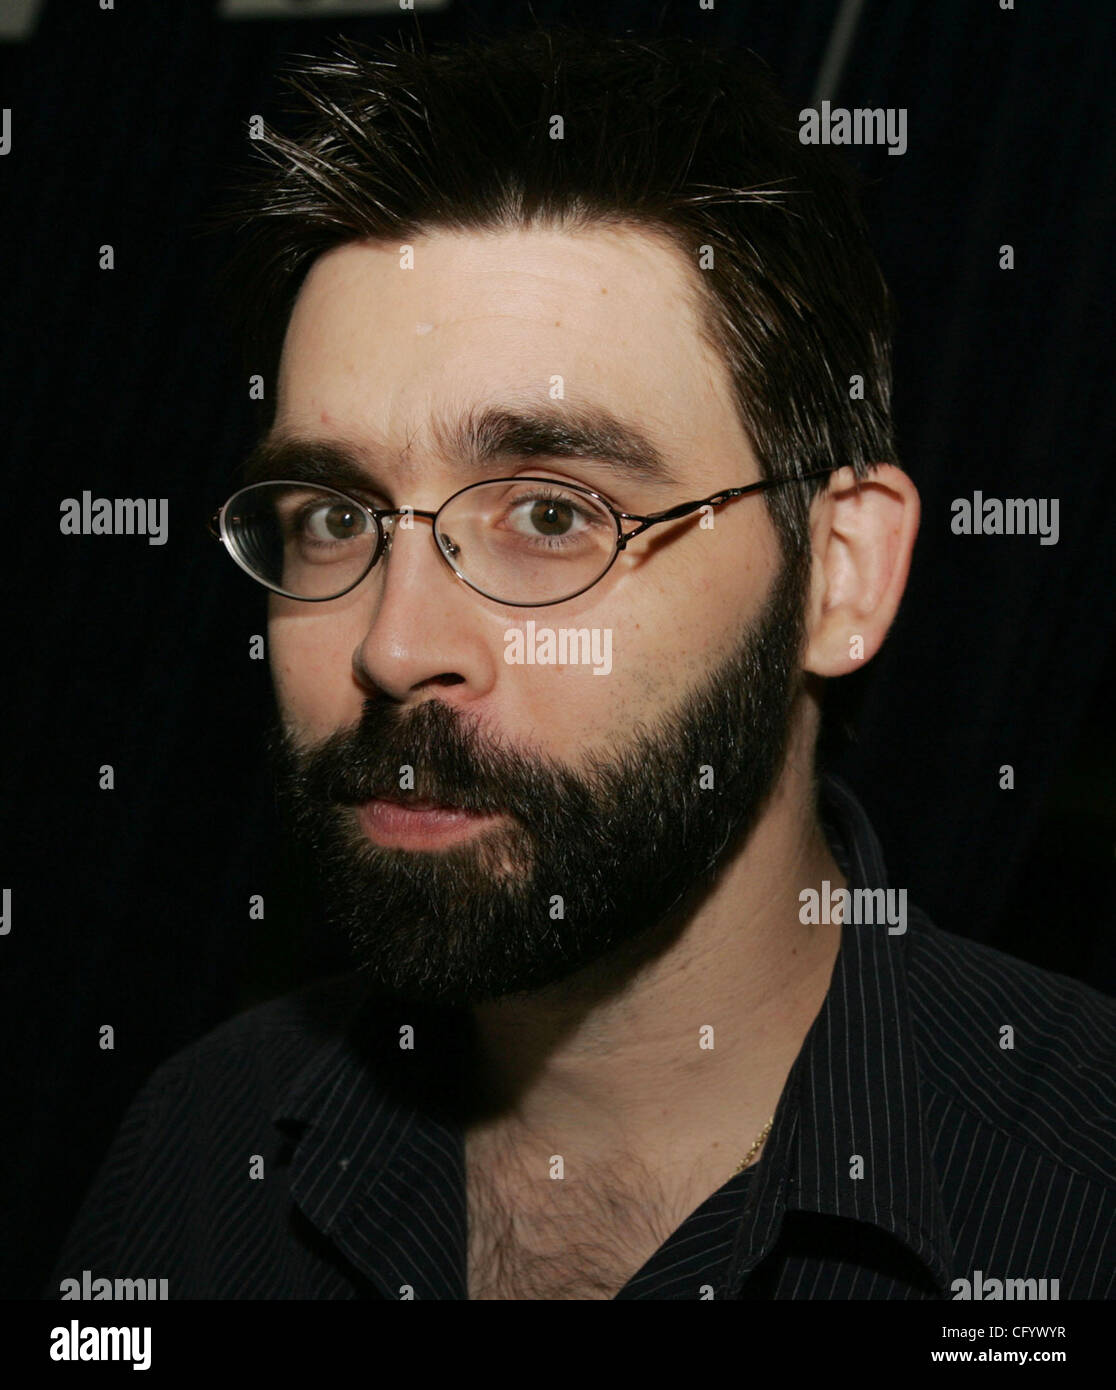 Jun 02, 2007 - New York, NY, USA - Author and Stephen King's son, JOE HILL promotes his new book '20th Century Ghosts' at the BookExpo America 2007 trade show held at the Jacob Javits Convention Center. (Credit Image: © Nancy Kaszerman/ZUMA Press) Stock Photo